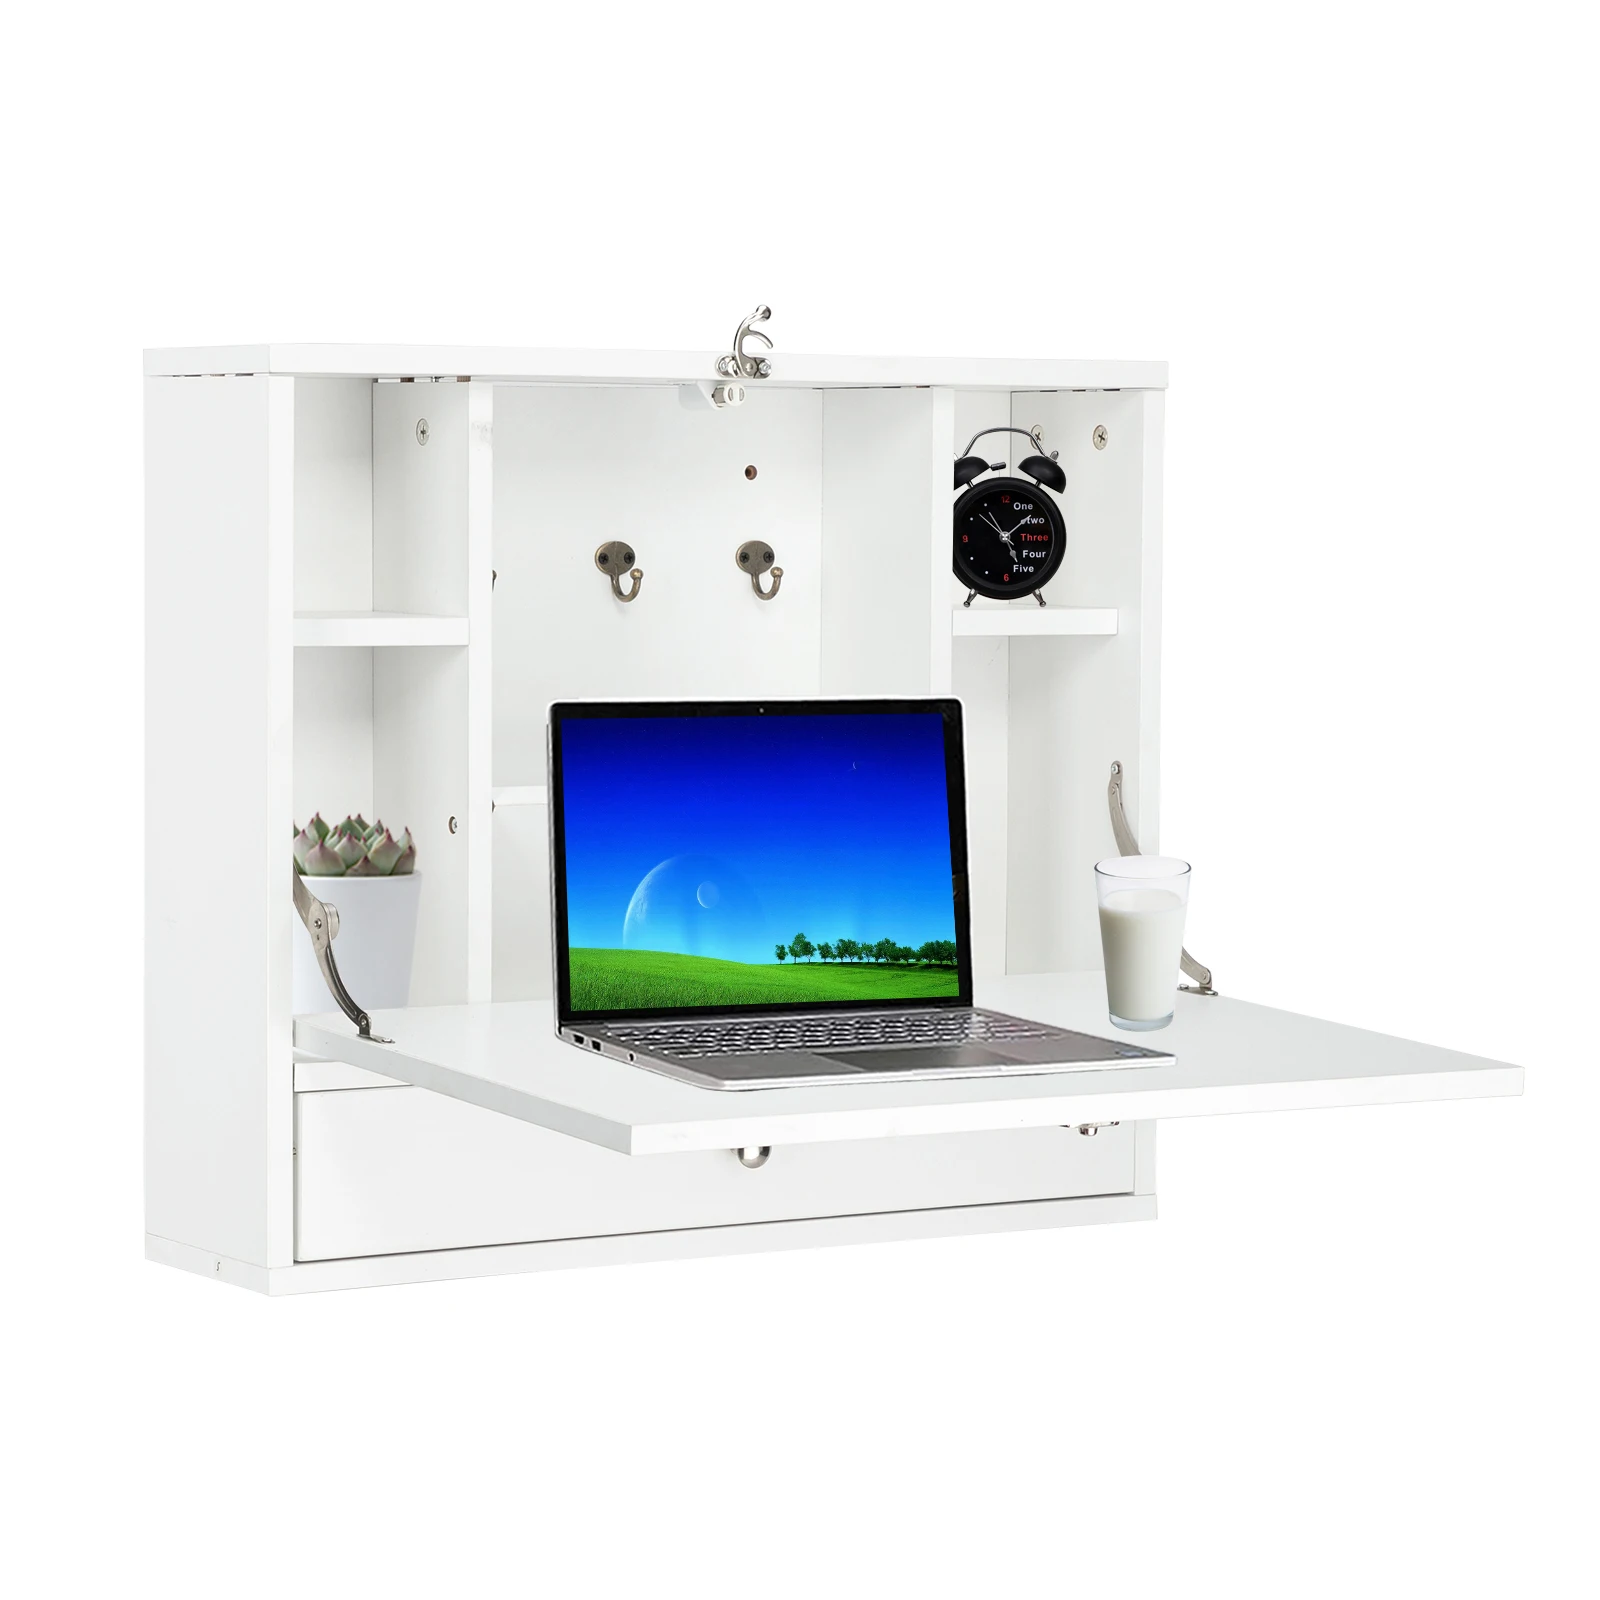 

【USA READY STOCK】Density Board with Triamine Wall Built-up Computer Desk White